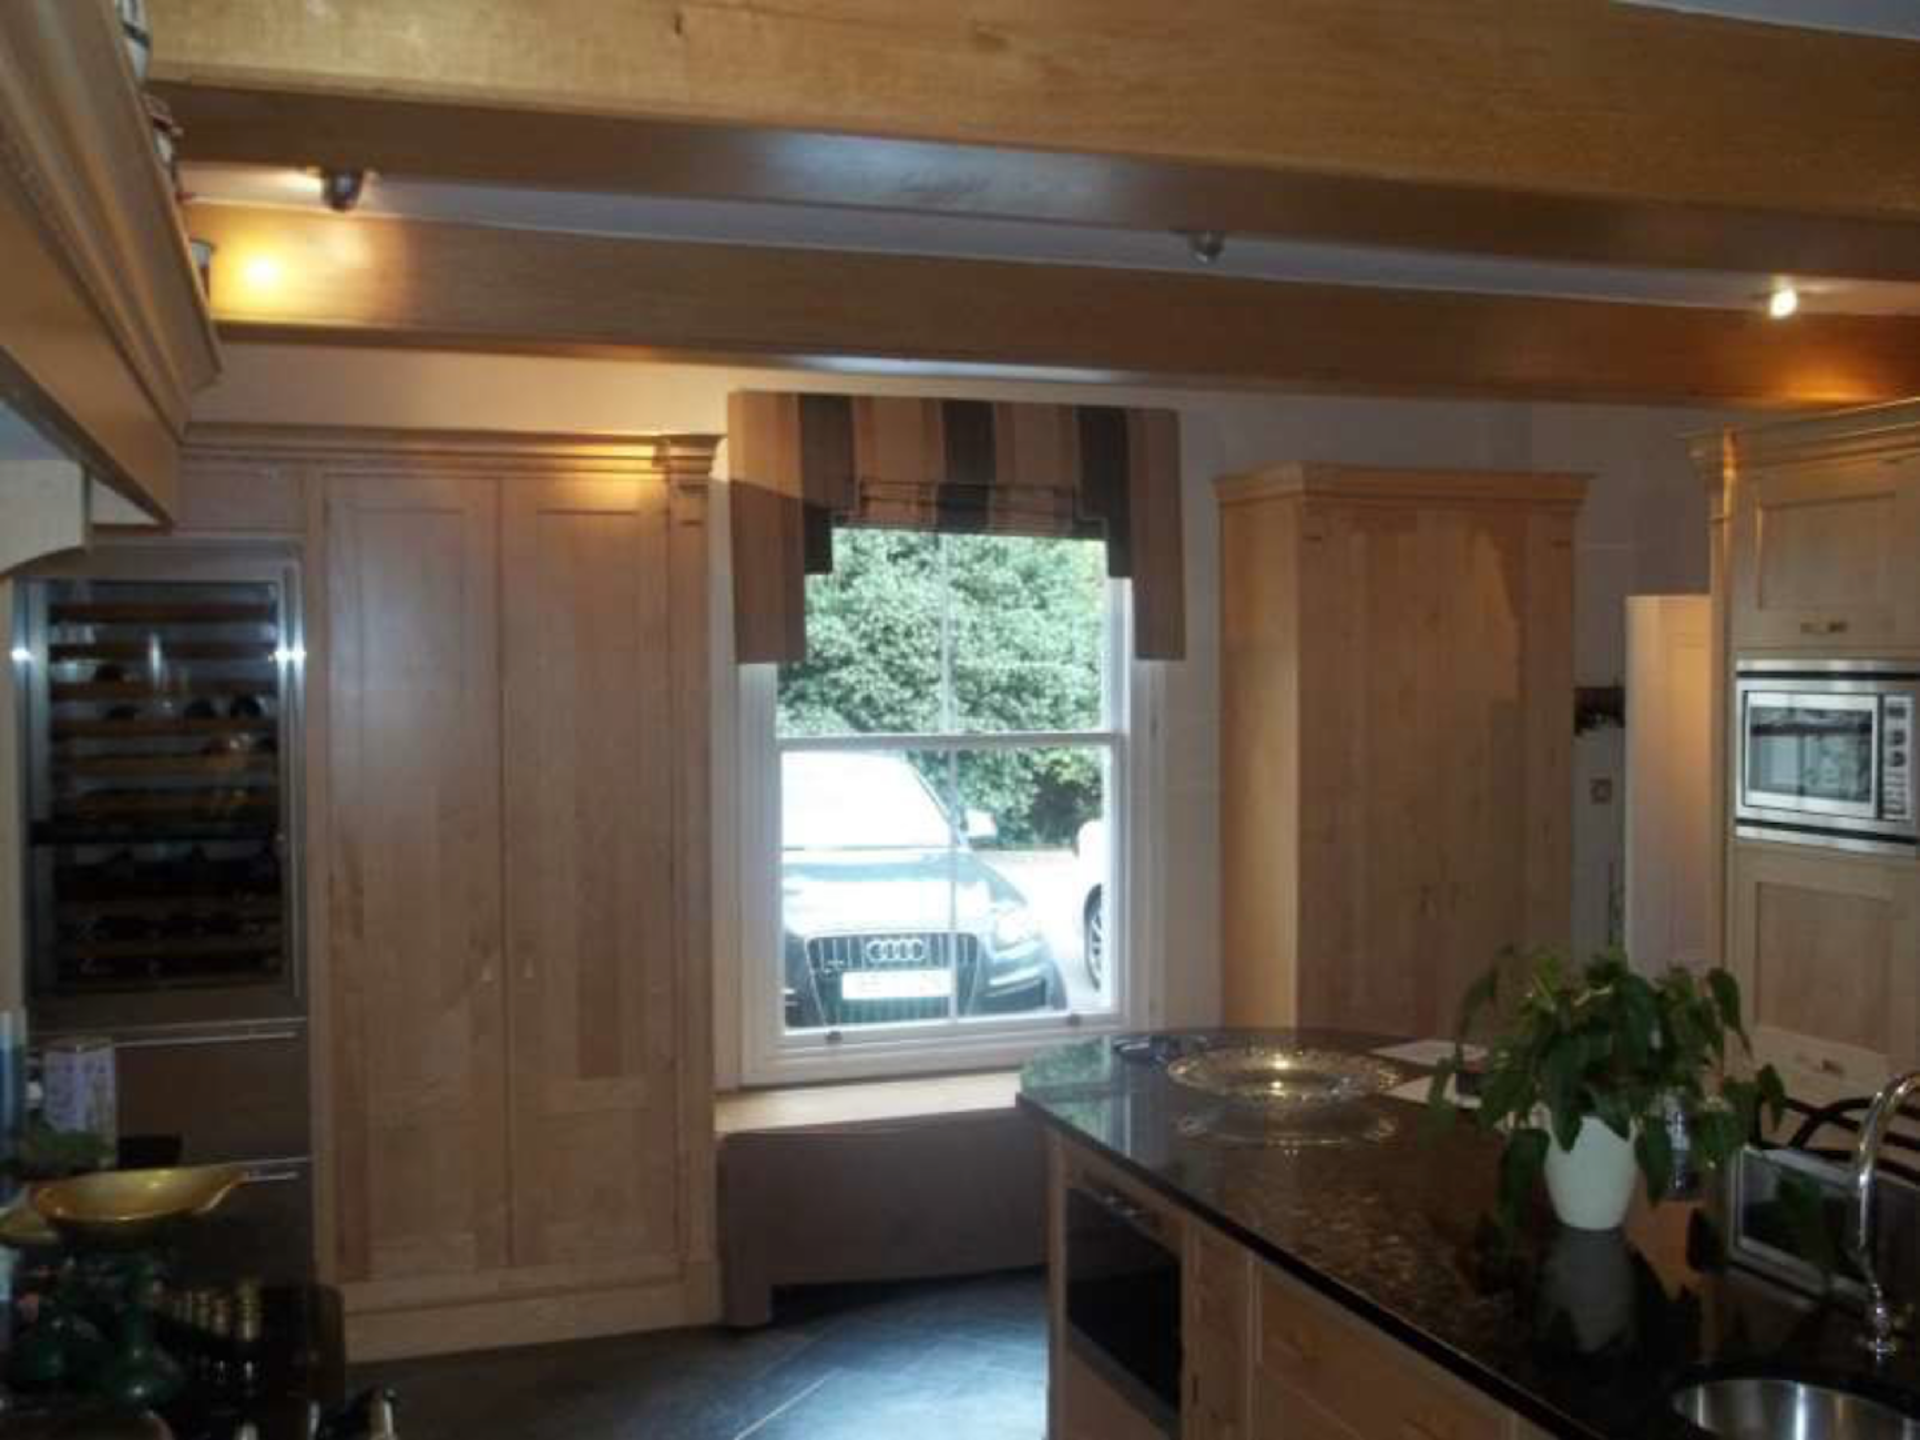 Luxury Used Mark Wilkinson Maple "Mai" Kitchen Complete with Aga and Miele Appliances - Image 12 of 14